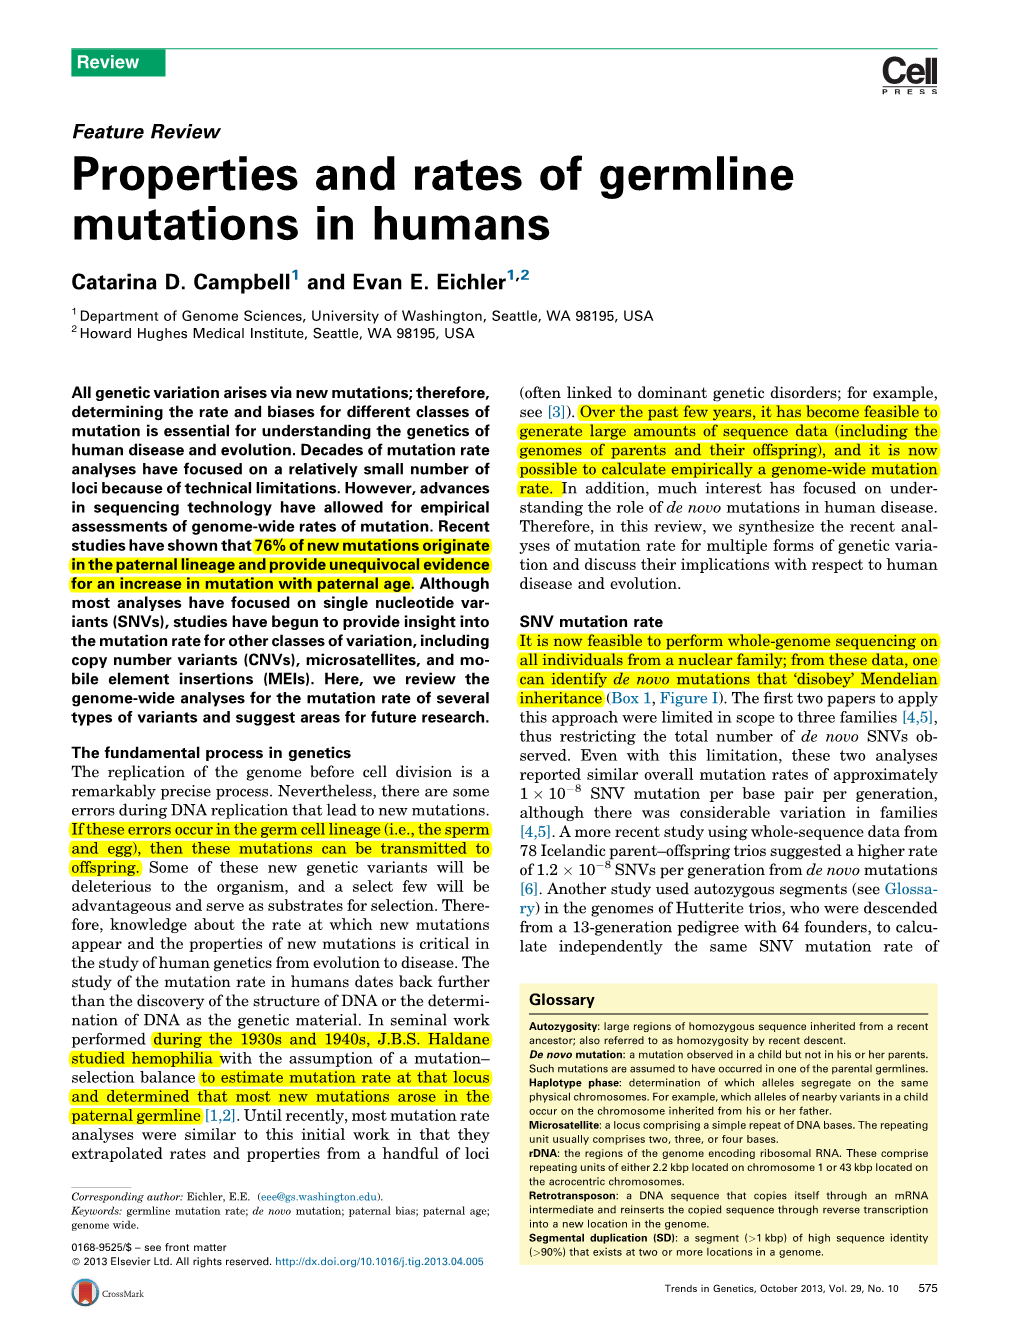 Properties and Rates of Germline Mutations in Humans